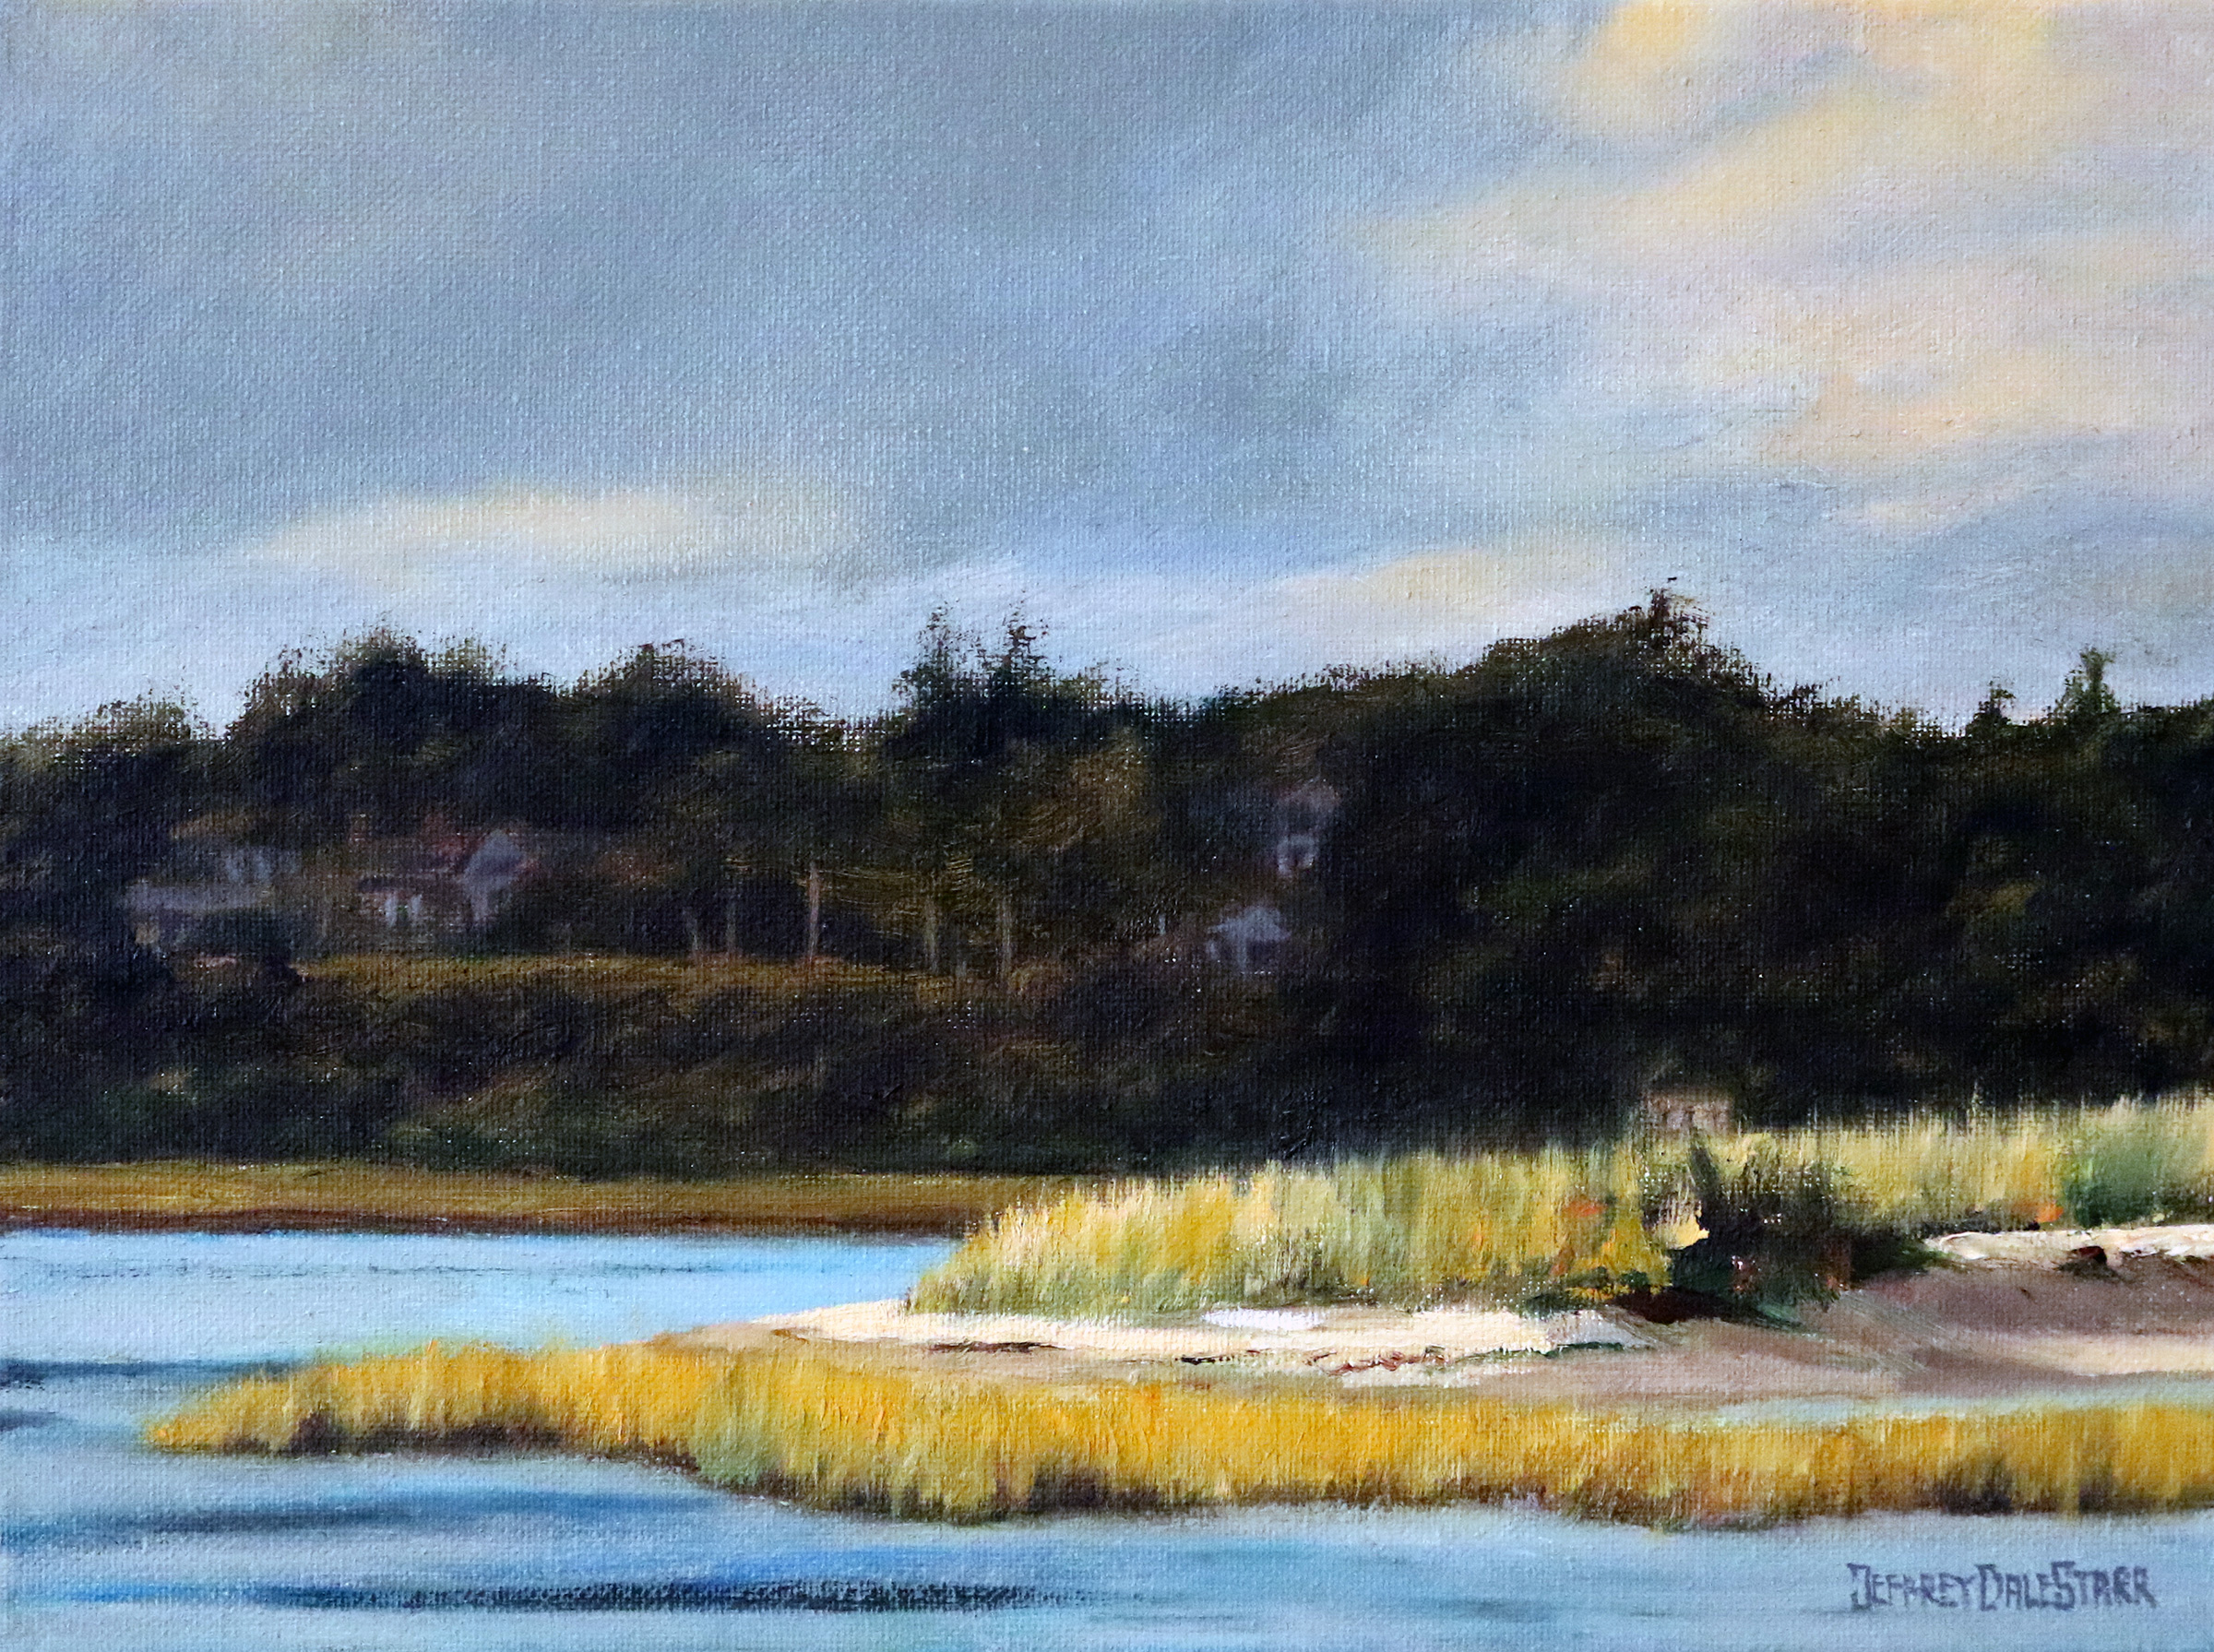 Oil painting "When the Sunbeam Hit the Island" by Jeffrey Dale Starr